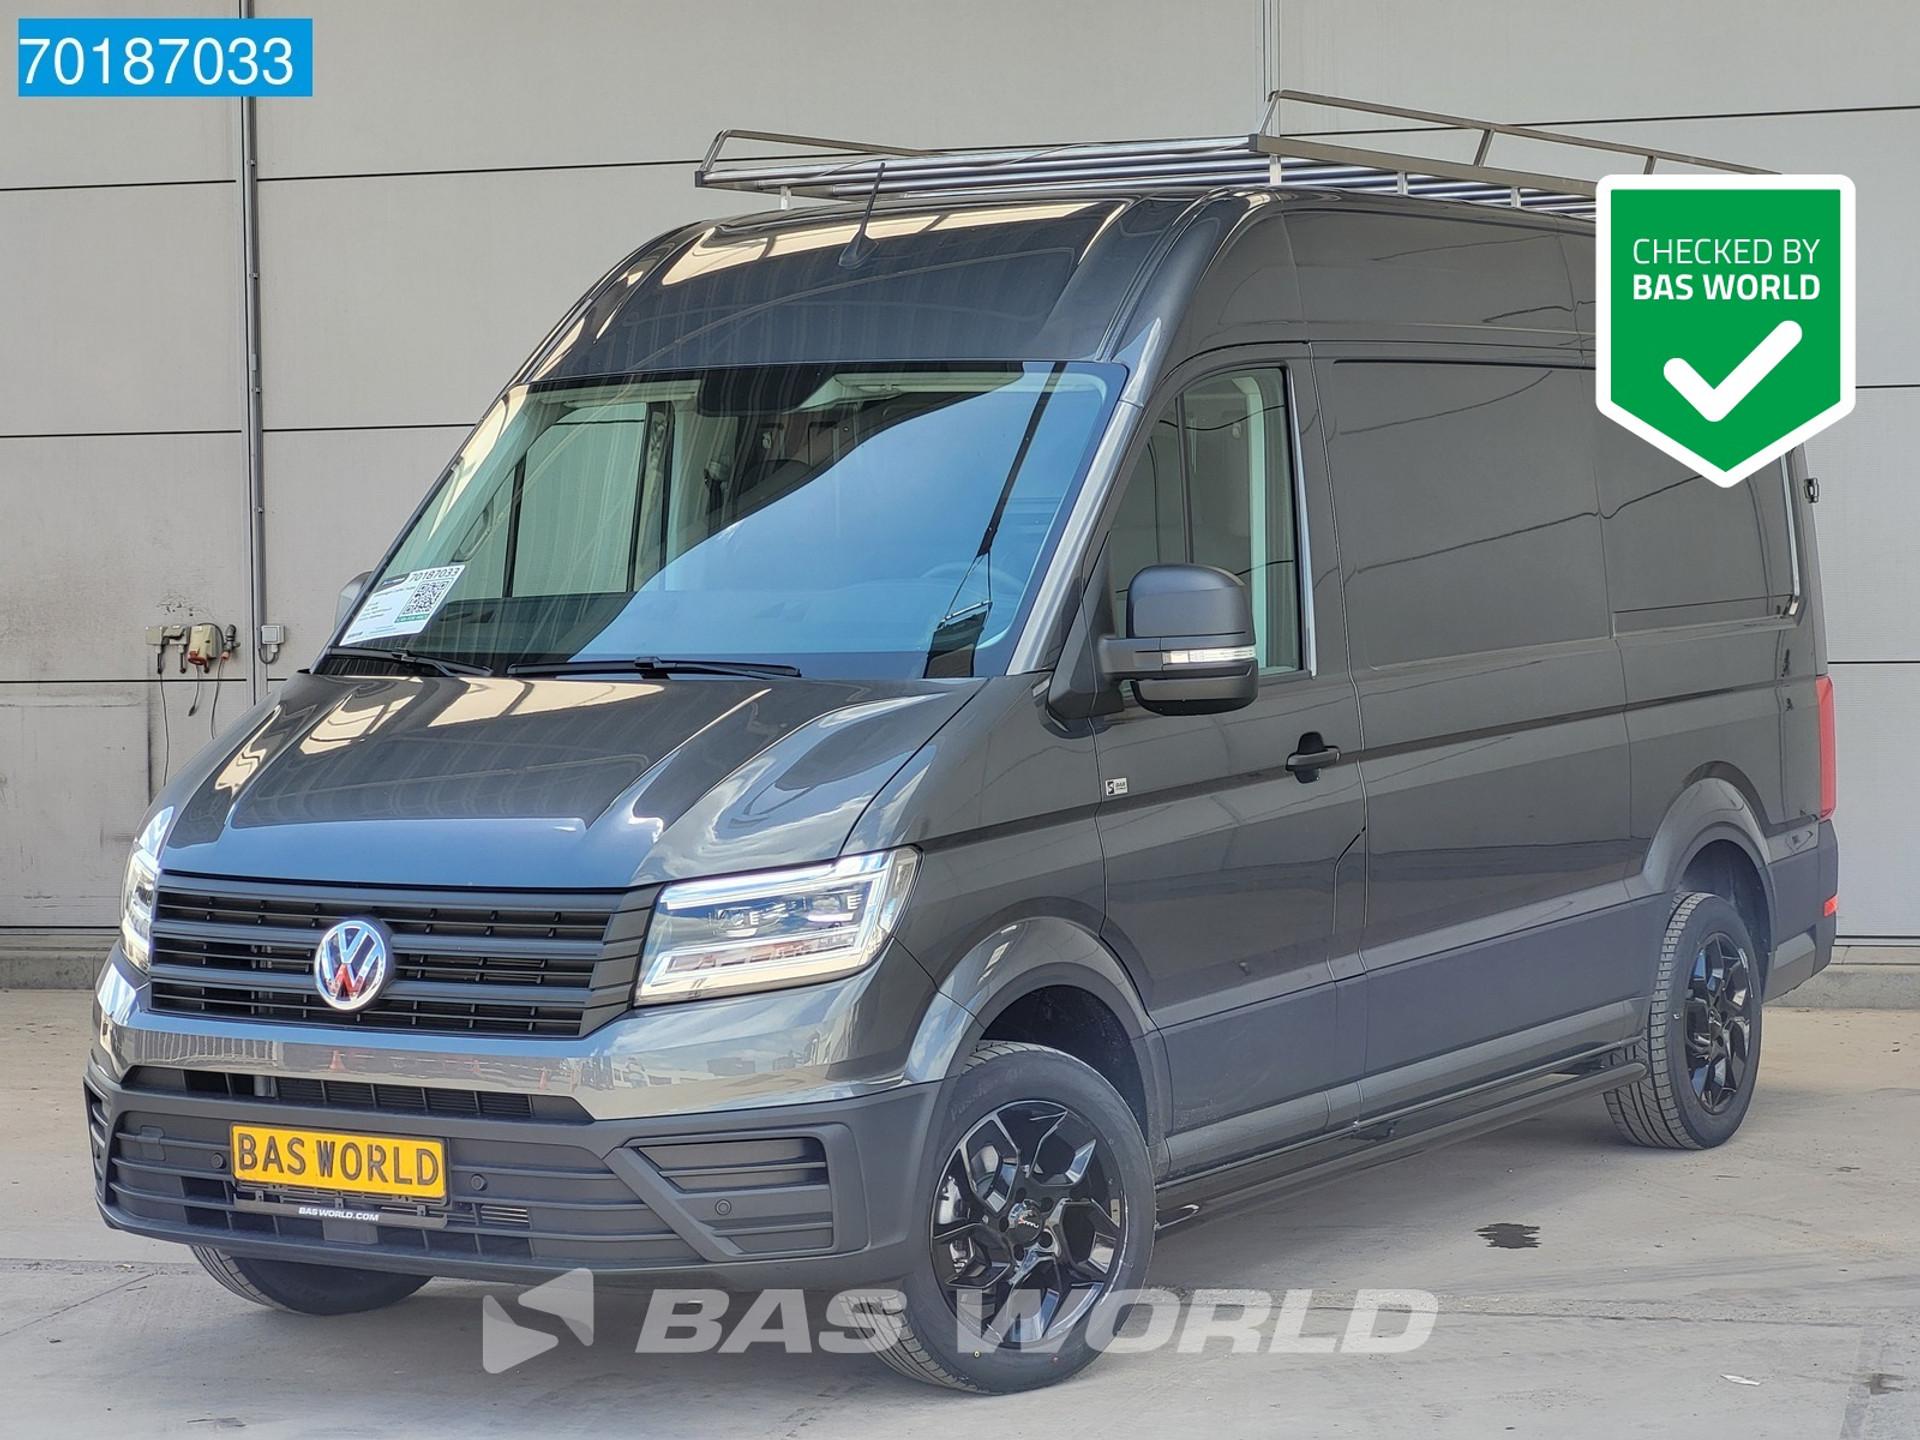 Foto 1 van Volkswagen Crafter 140pk Automaat L3H3 Imperiaal 18''Velgen Sidebars ACC LED Airco Cruise L2H2 11m3 Airco